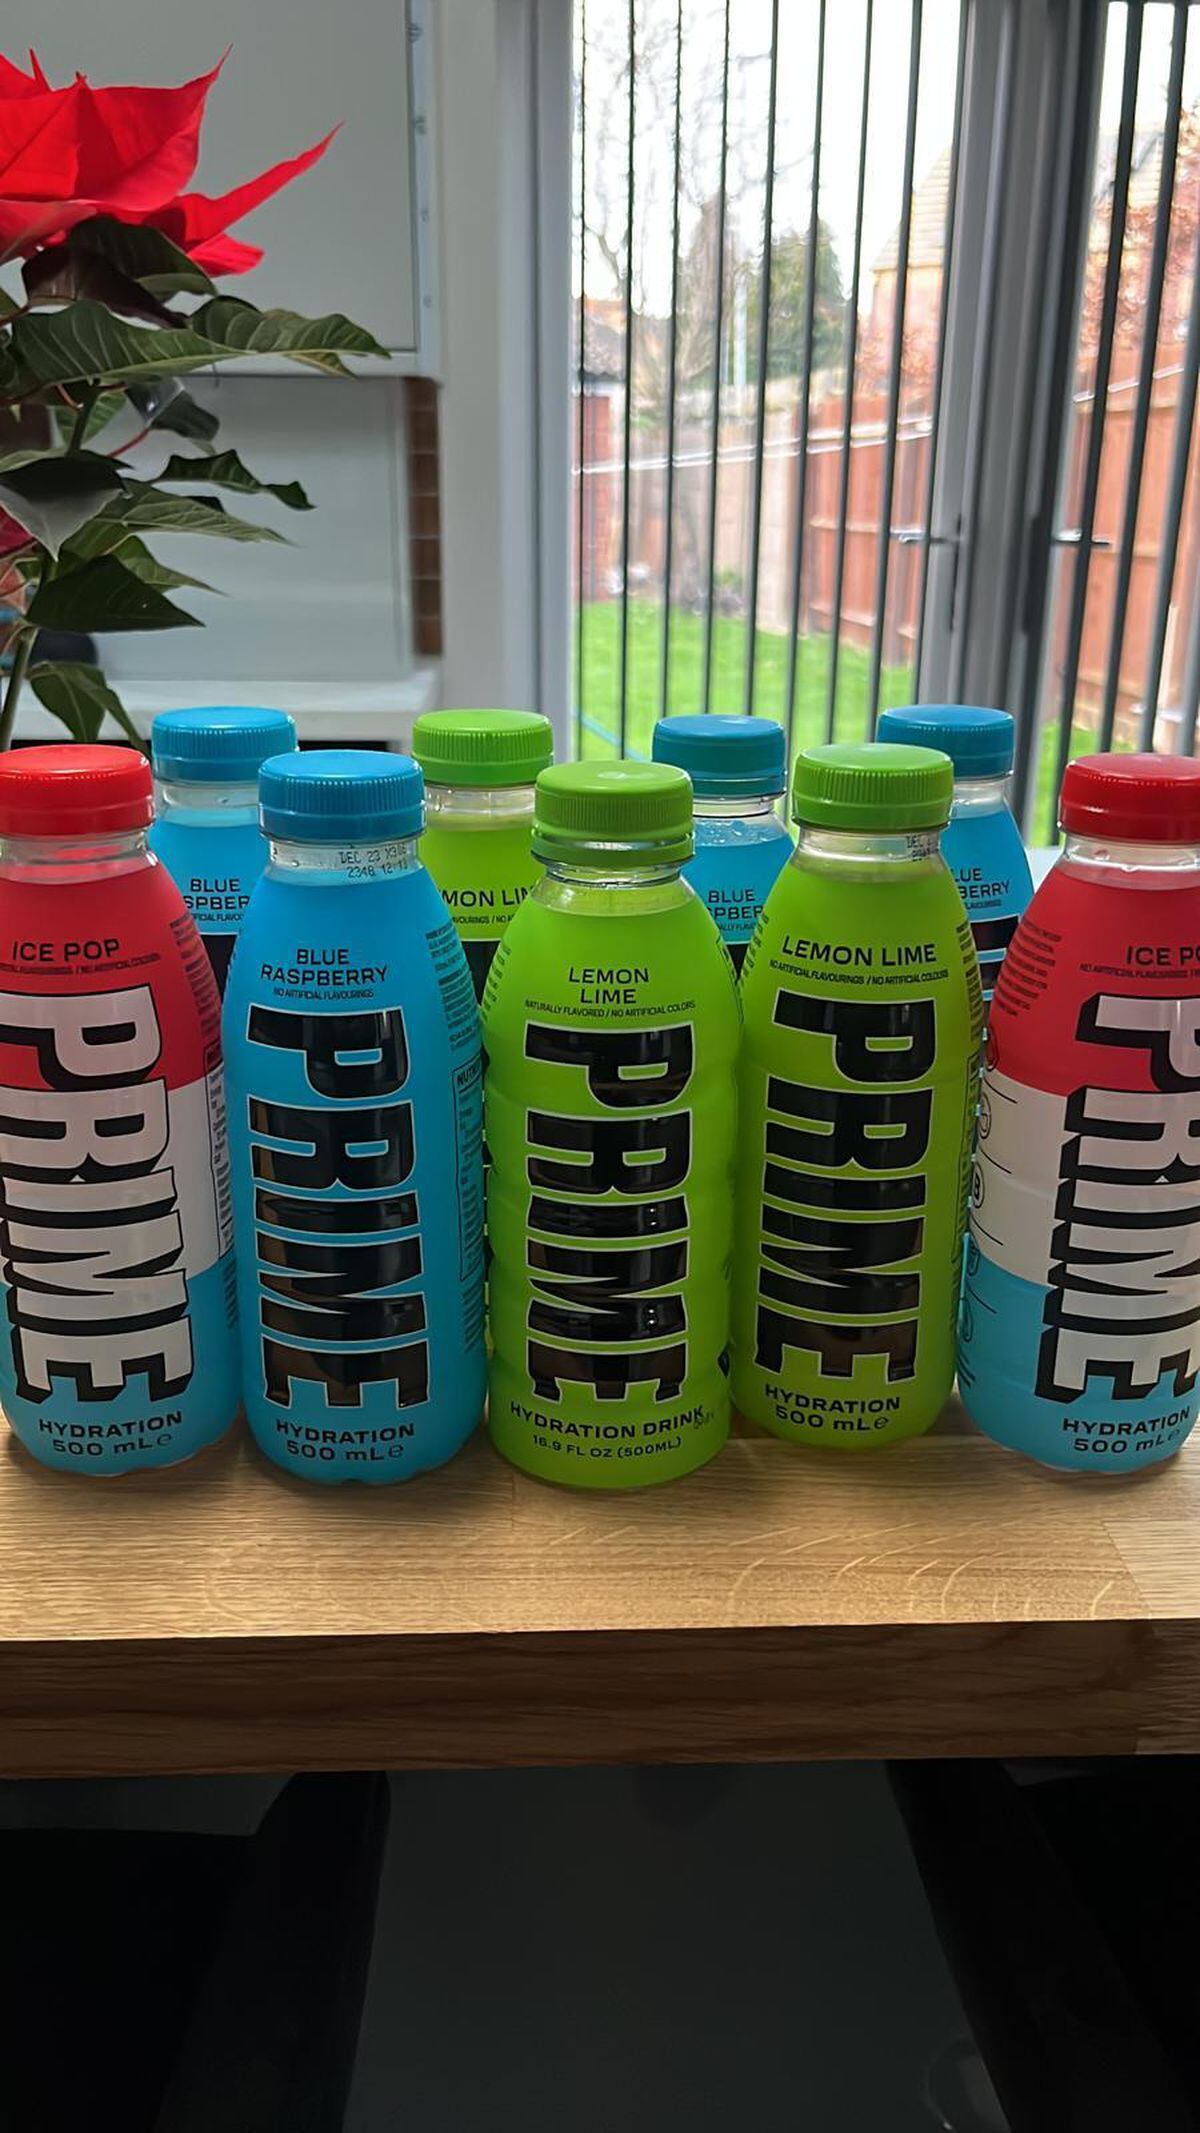 Prime Drink - the bottles that have teenagers going crazy for. 